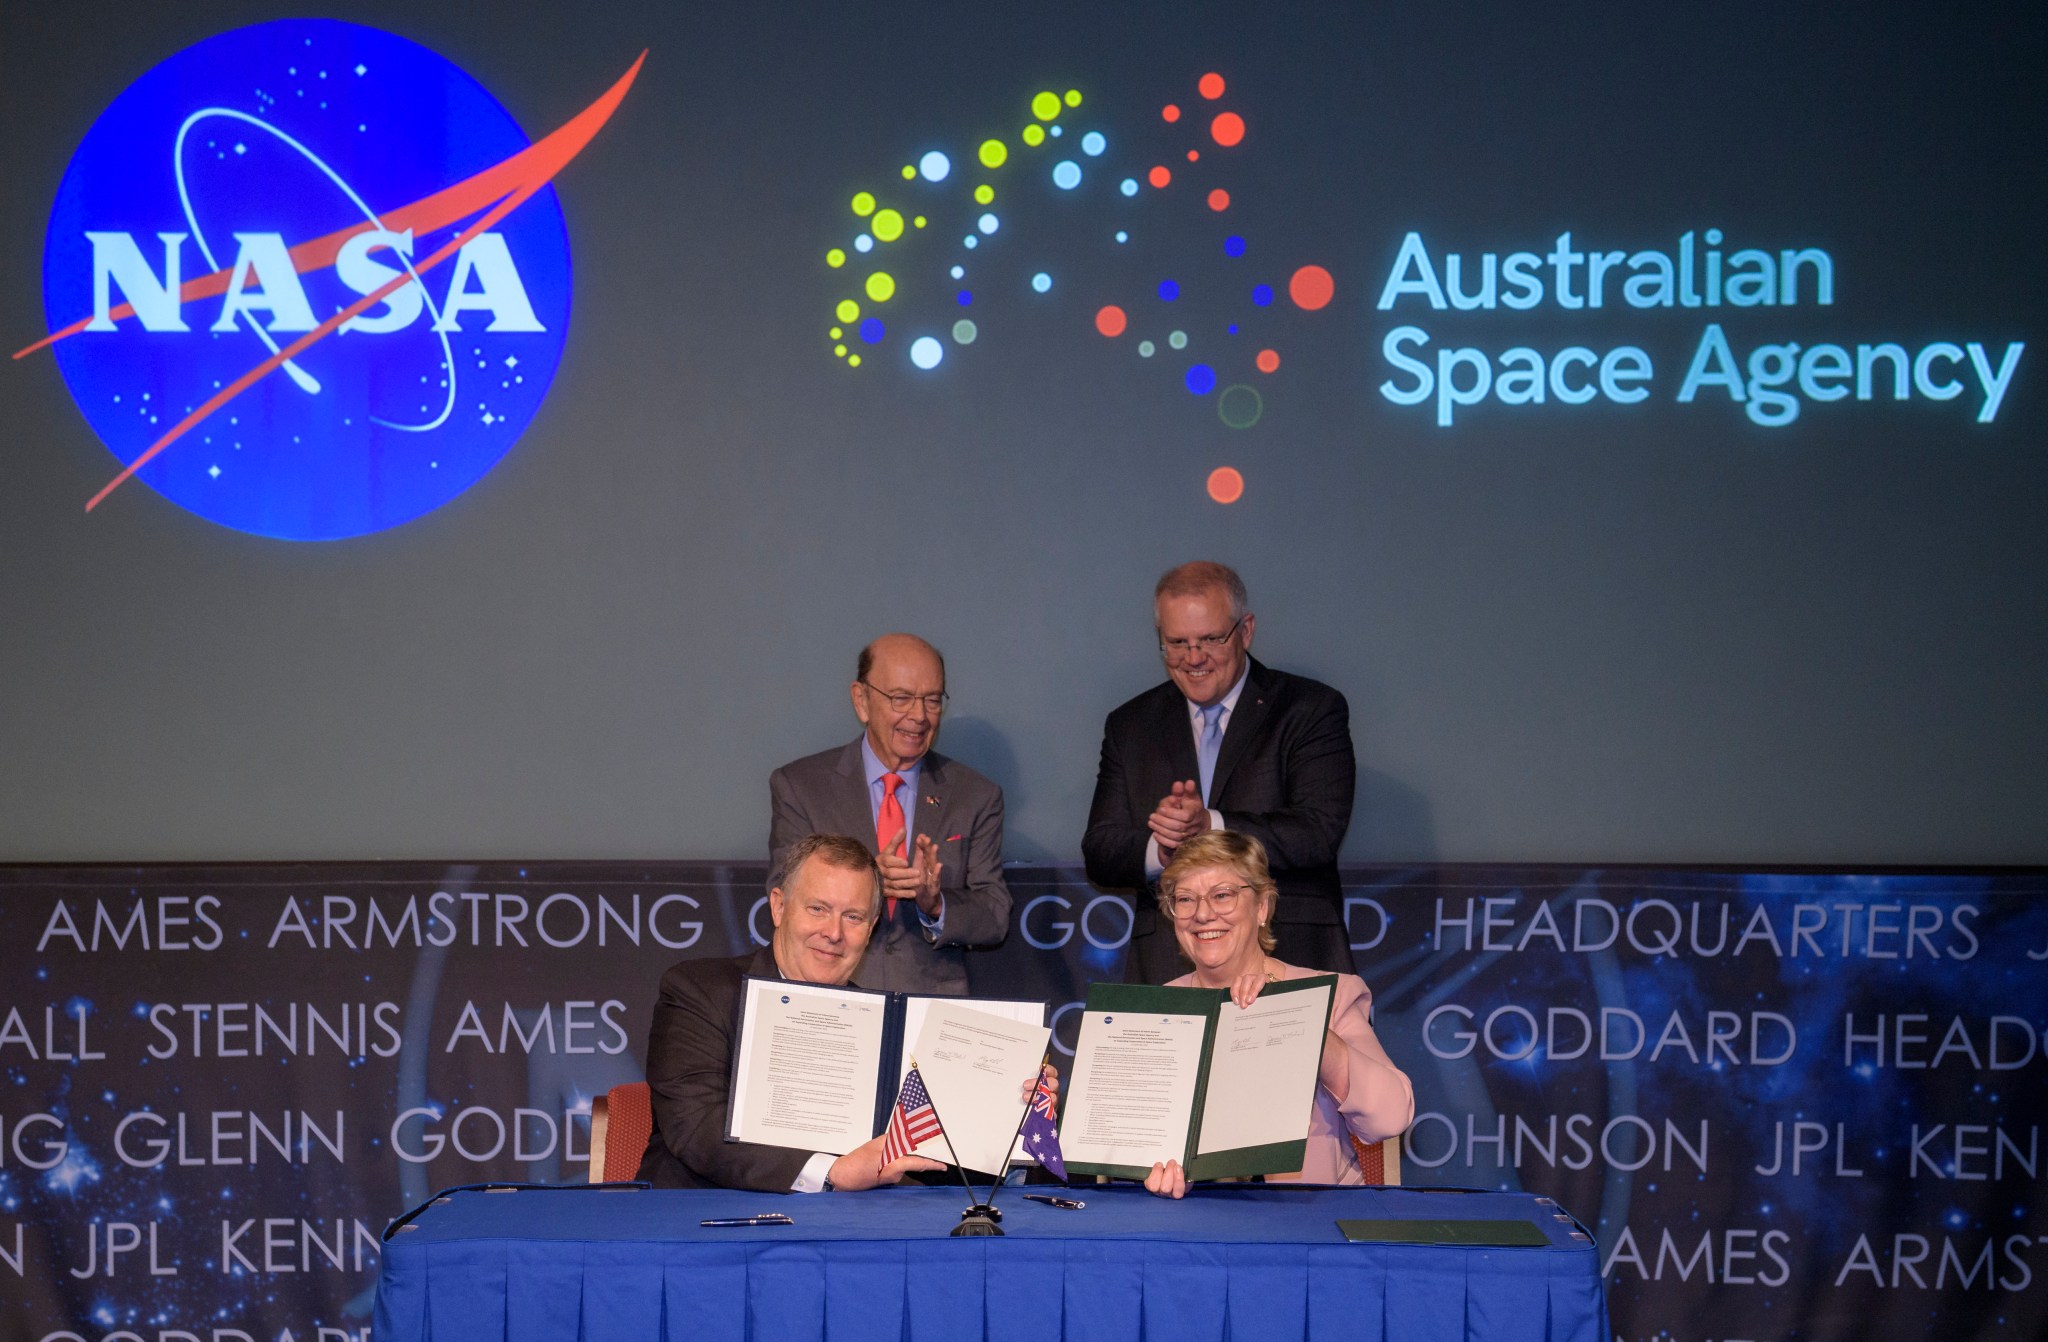 Signing of a letter of intent between NASA and the Australian Space Agency